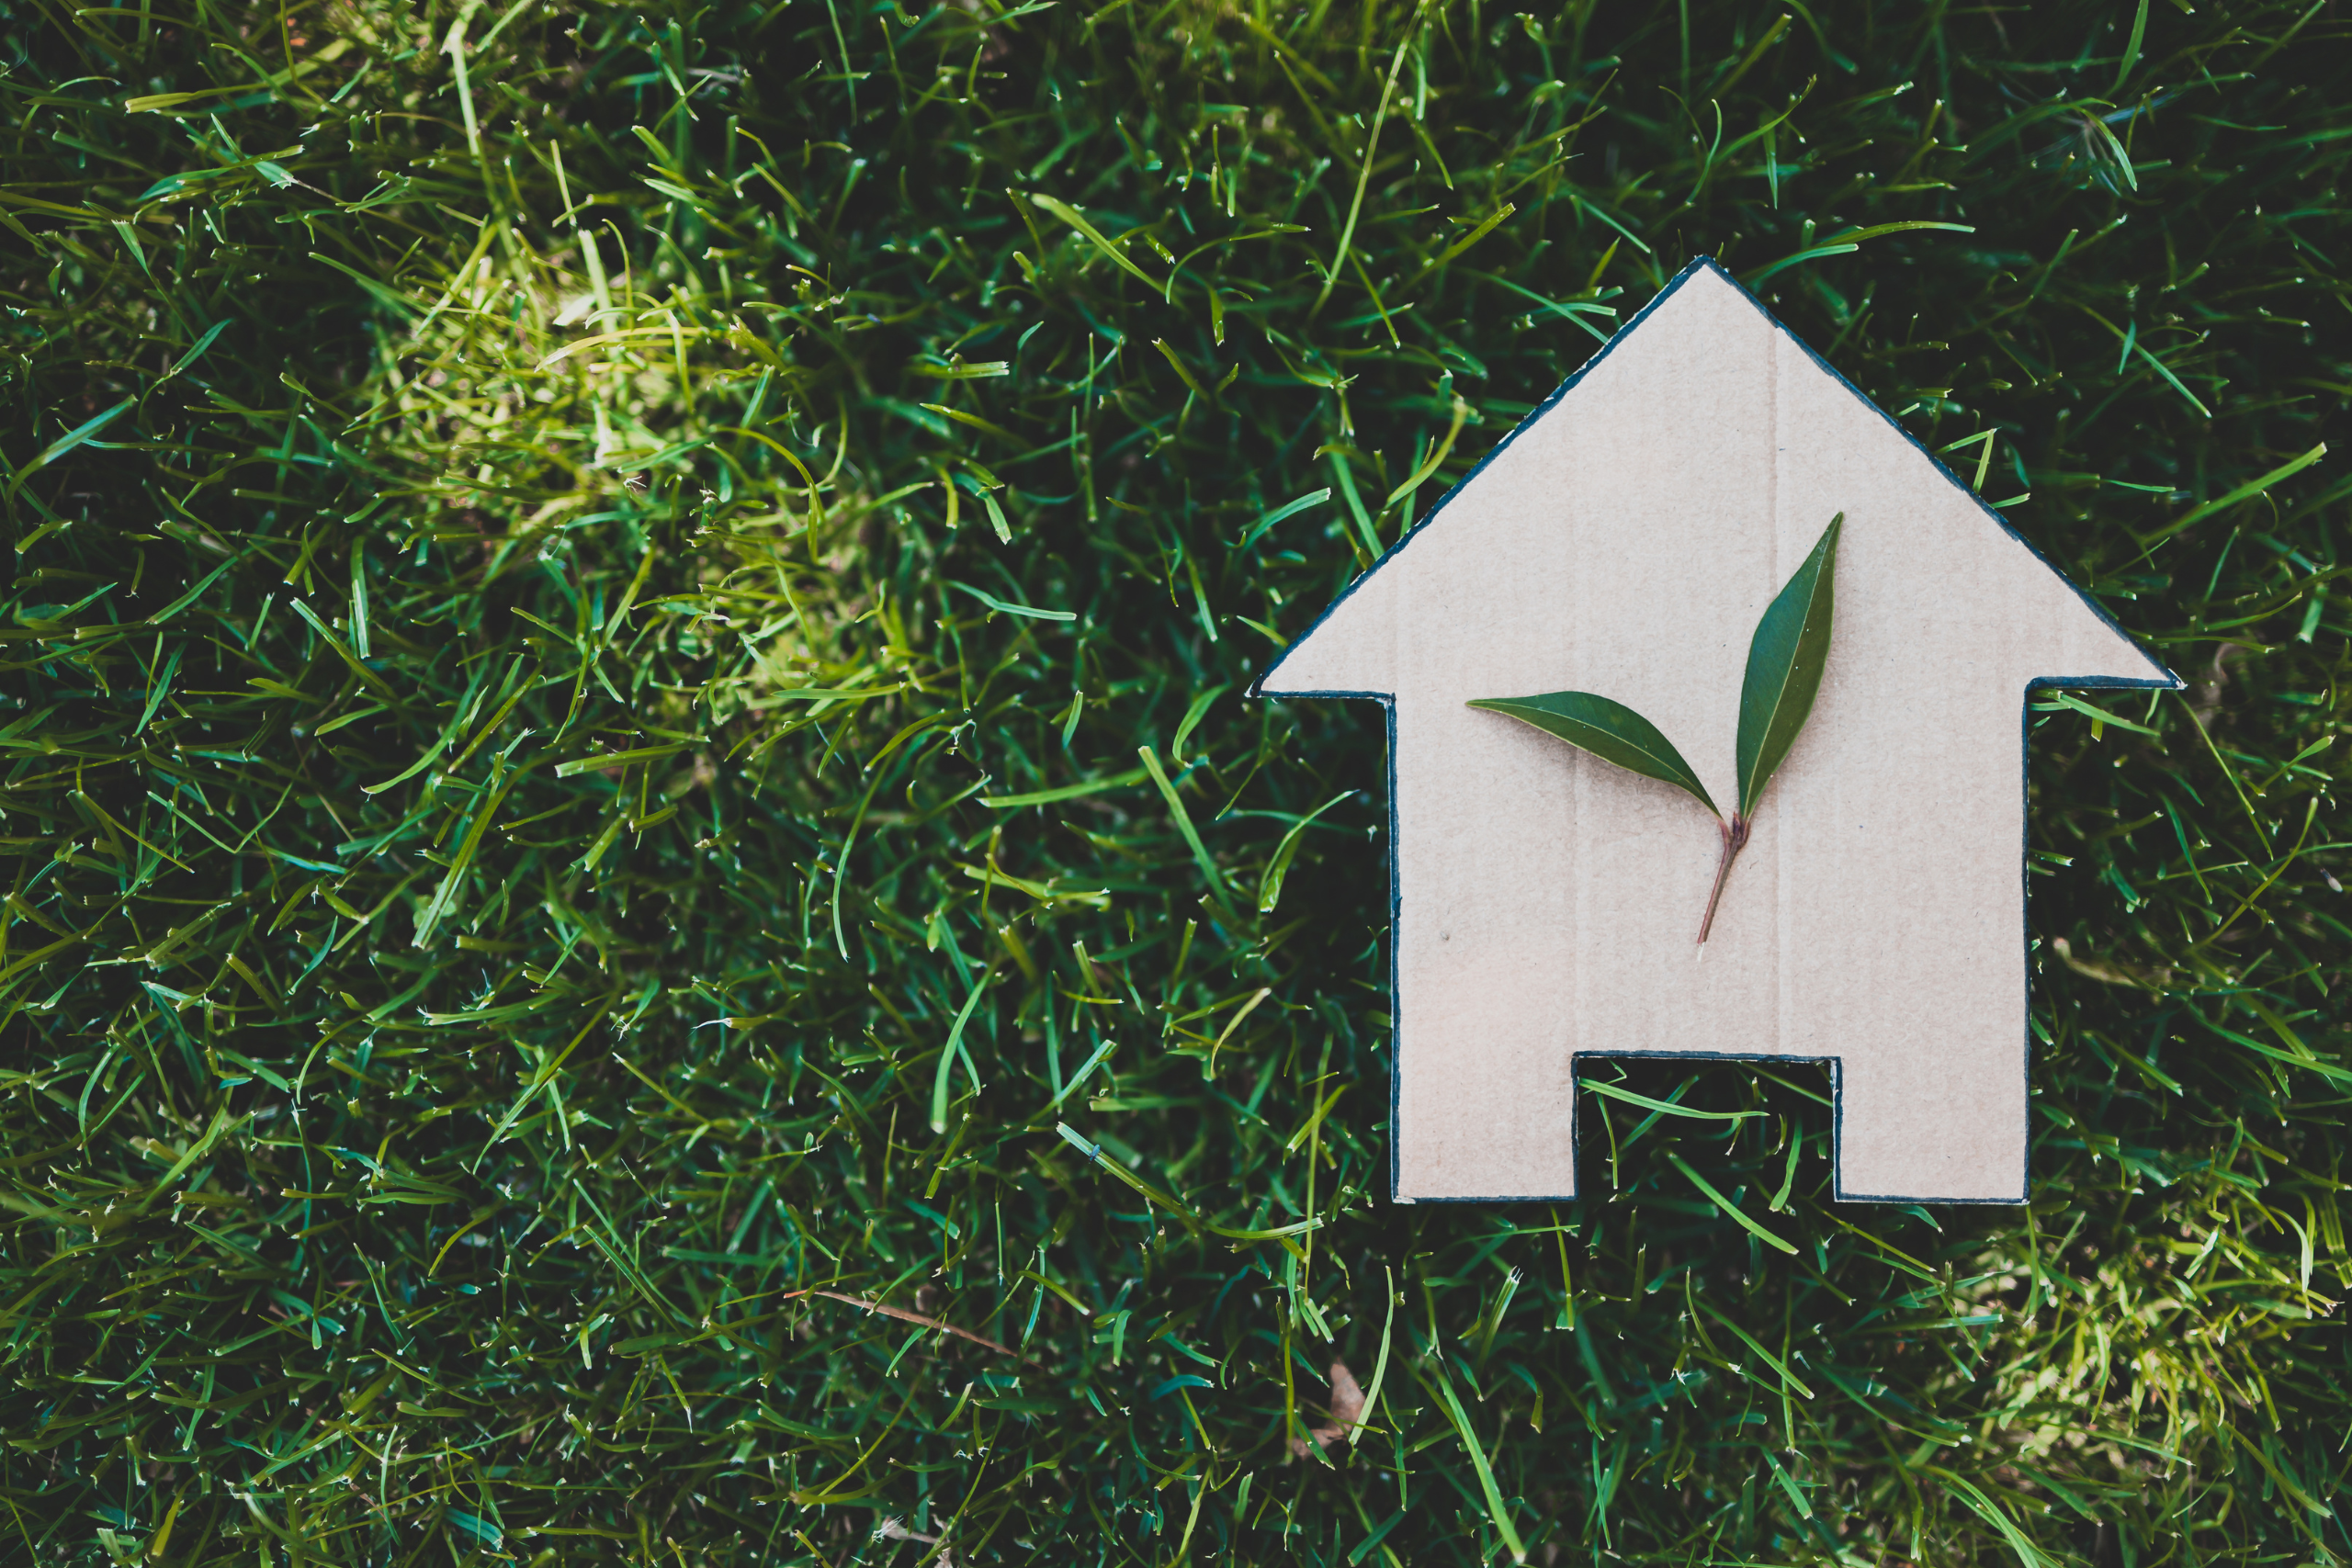 Ways To Improve Sustainability At Home